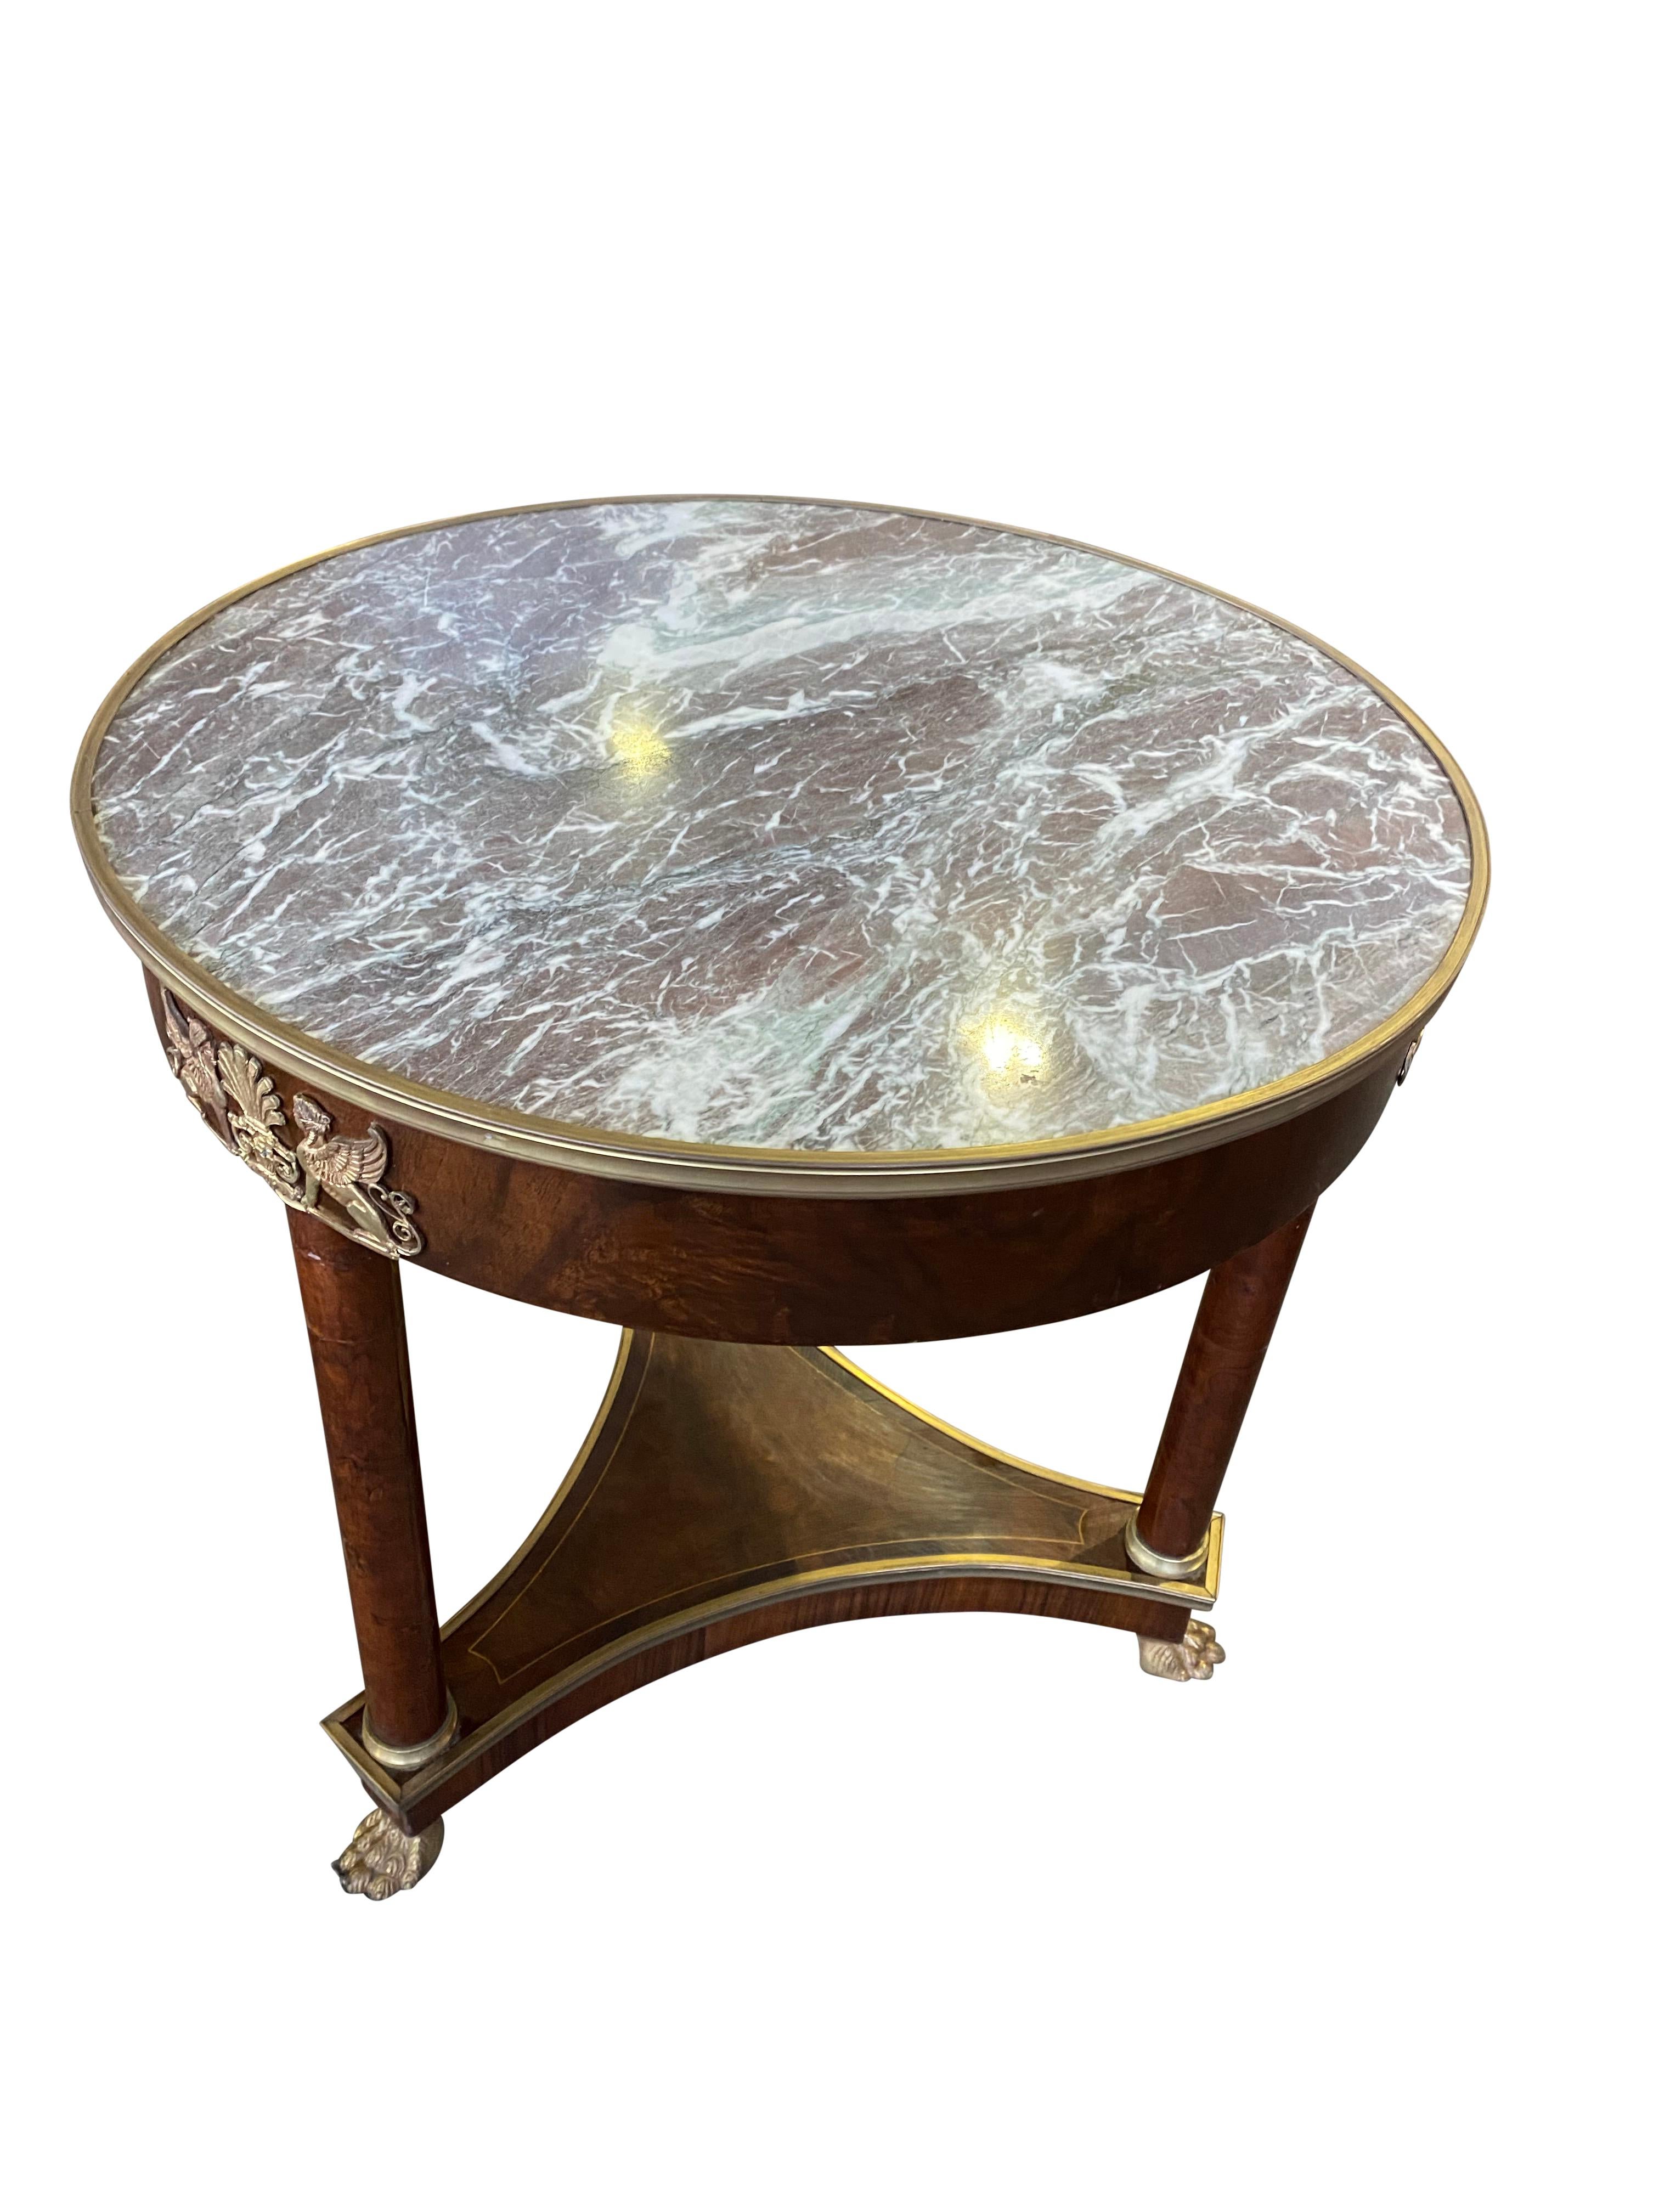 A fine 19th century French Empire round marble-top mahogany table with three legs separated by a triangular stretcher. The unique curved trip base supporting the table is lifted by golden paw-like feet beneath the legs. 

Dimensions (cm)
80 H/80